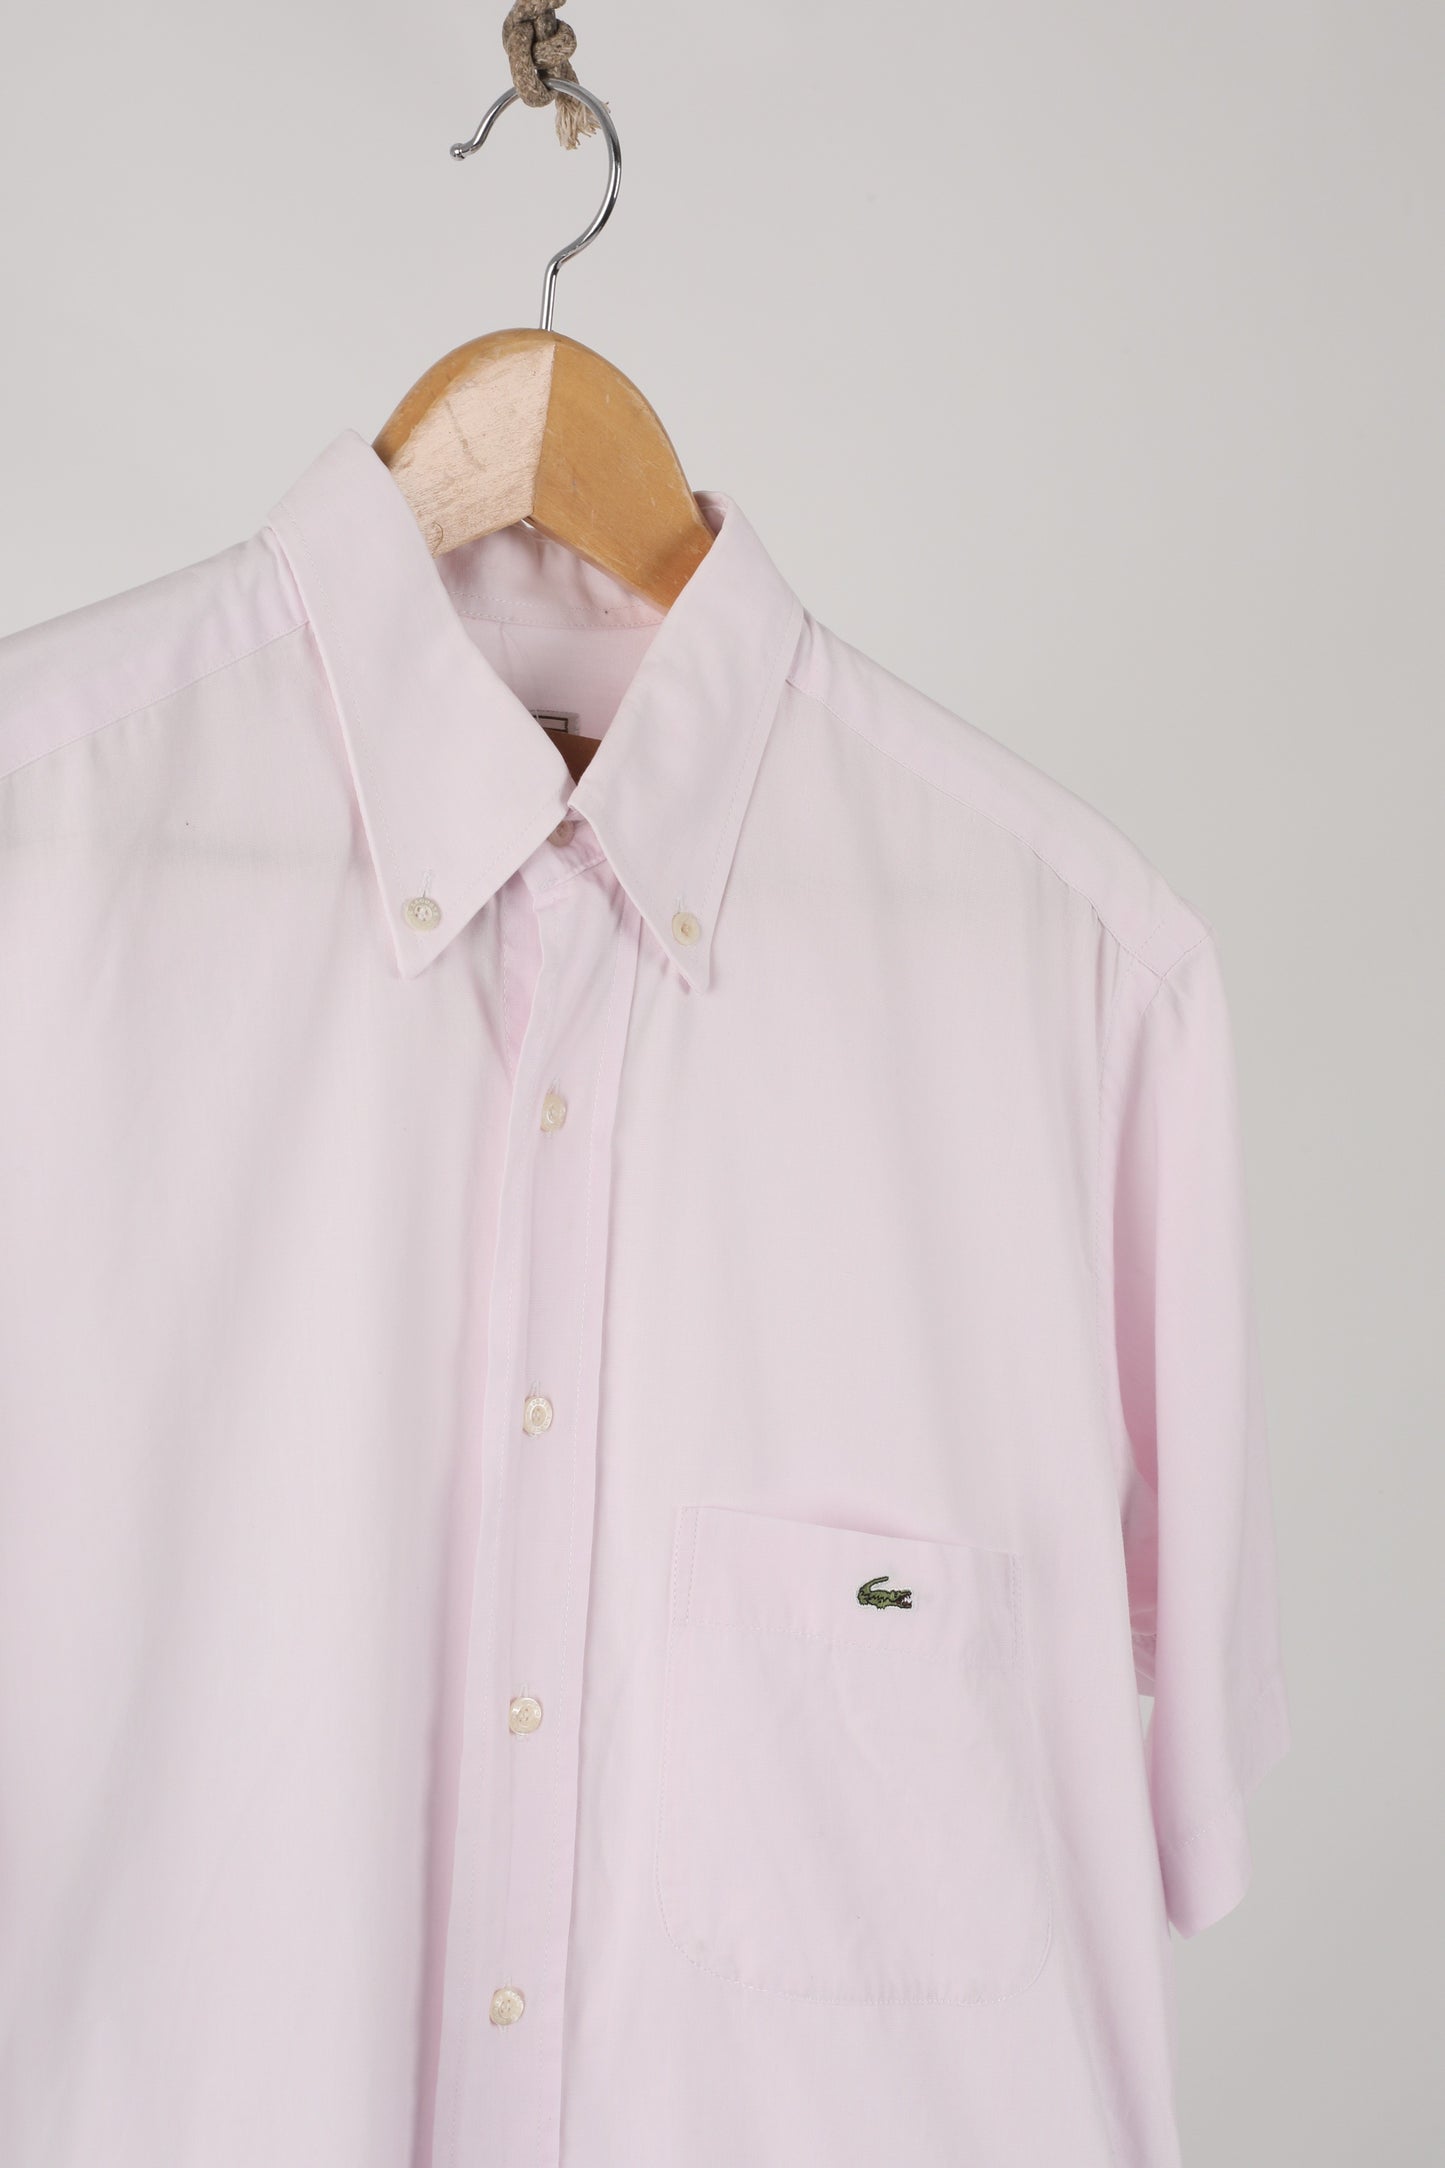 90s Lacoste baby pink short sleeve Oxford shirt (40)